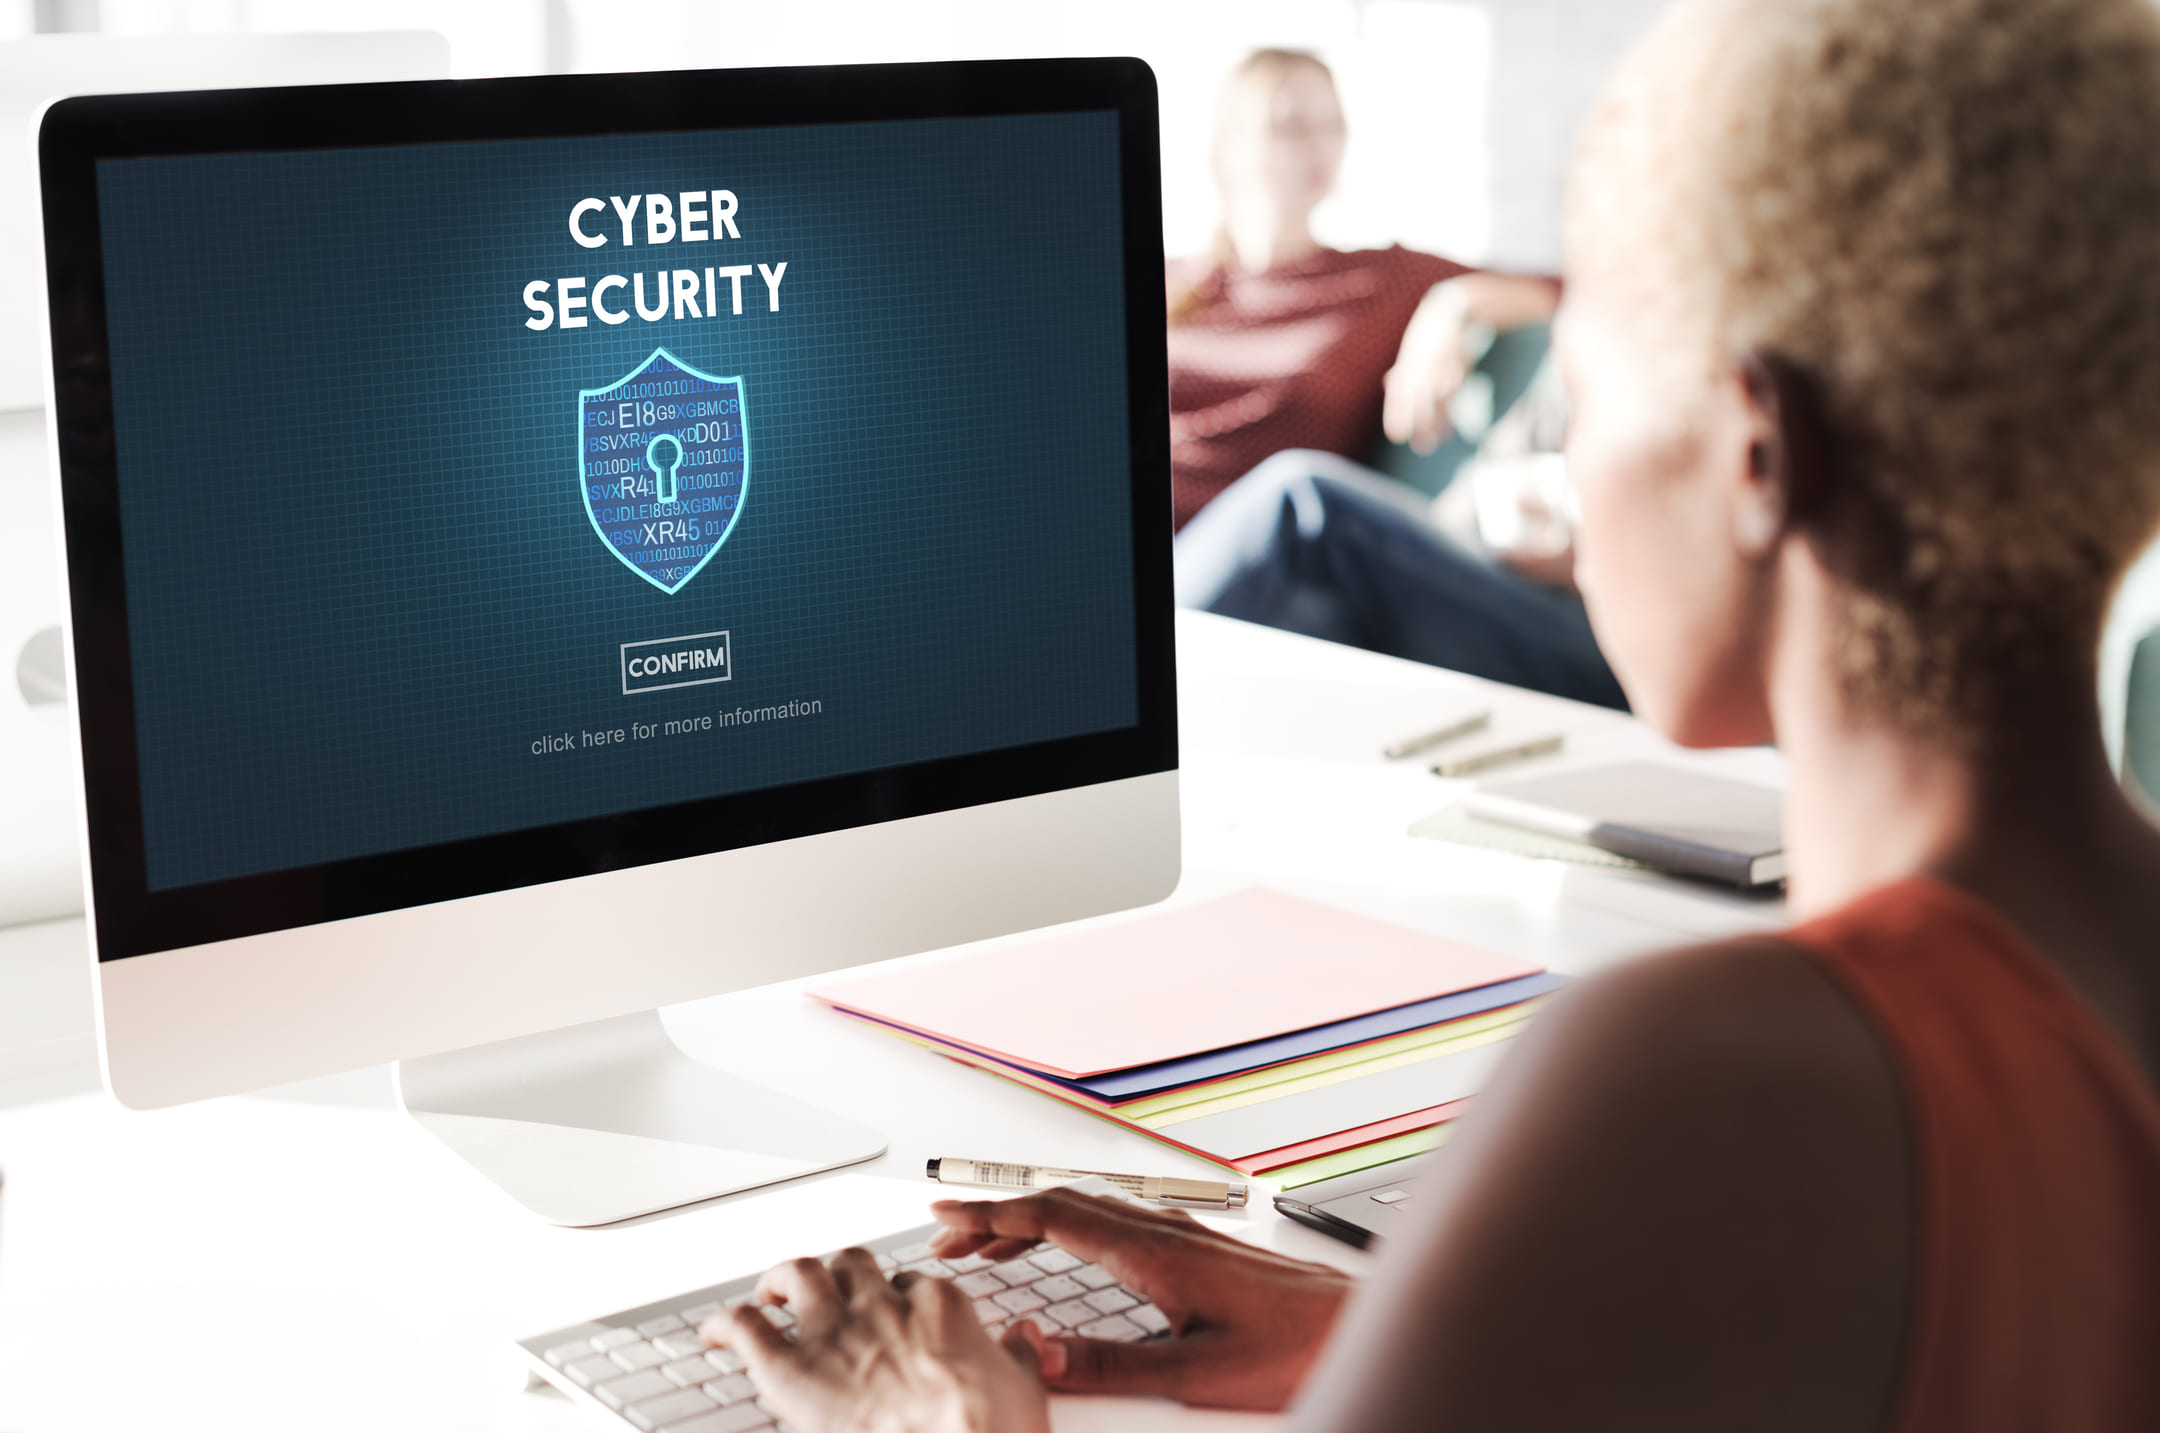 Improve your cyber security posture